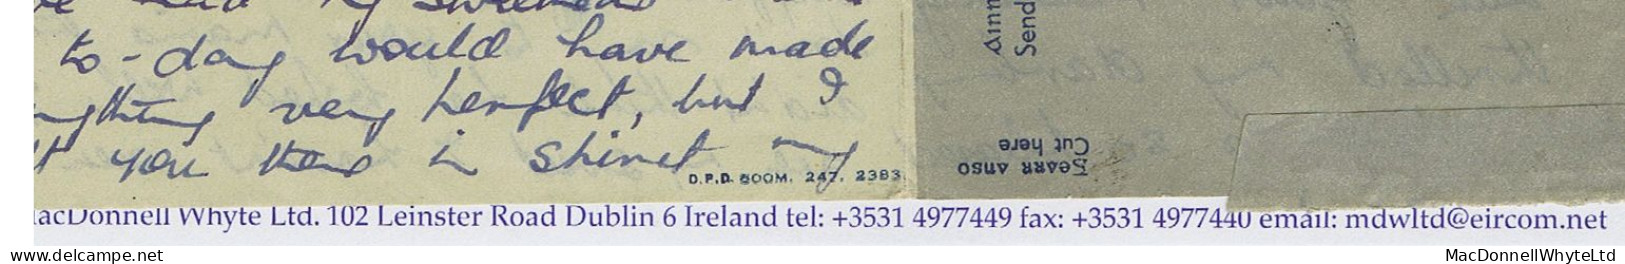 Ireland Airletter 1950 Aerogramme Imprint 247. 2383 Used Dublin To Hong Kong With Angel Victor 6d - Luftpost